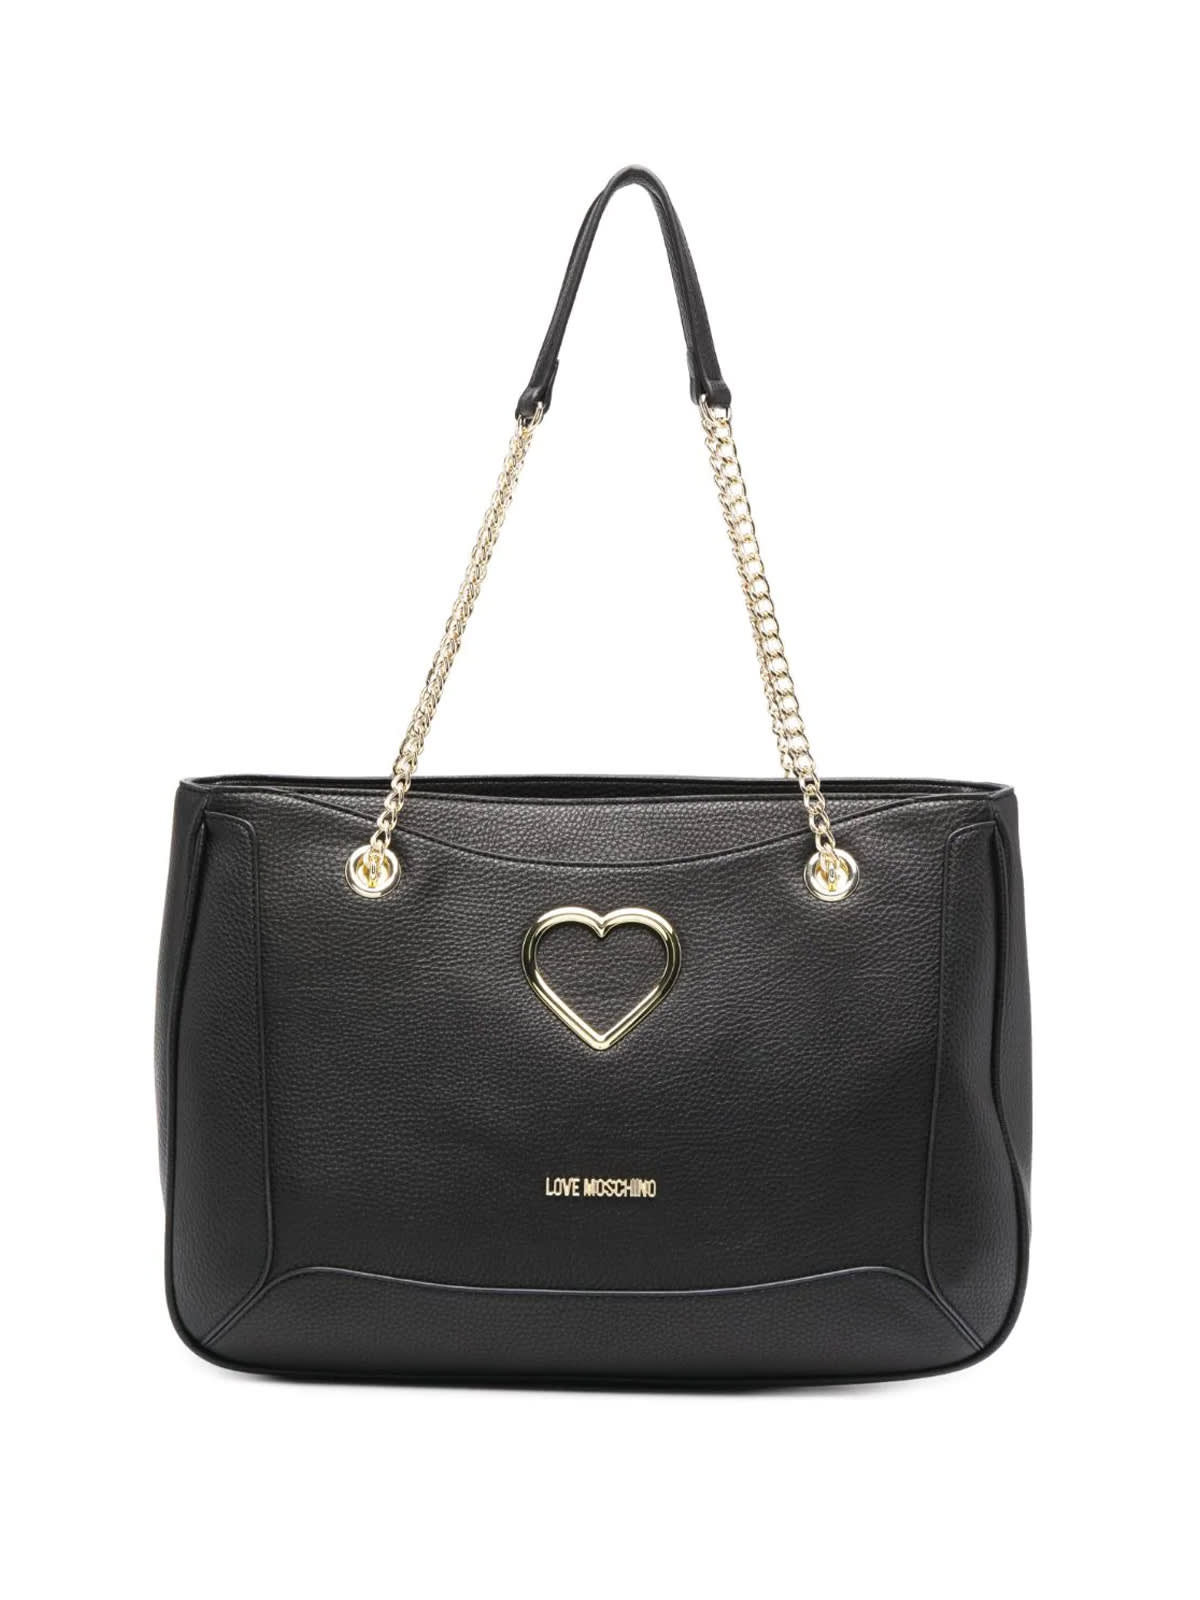 Love Moschino Grained Pu Large Shoulder Bag